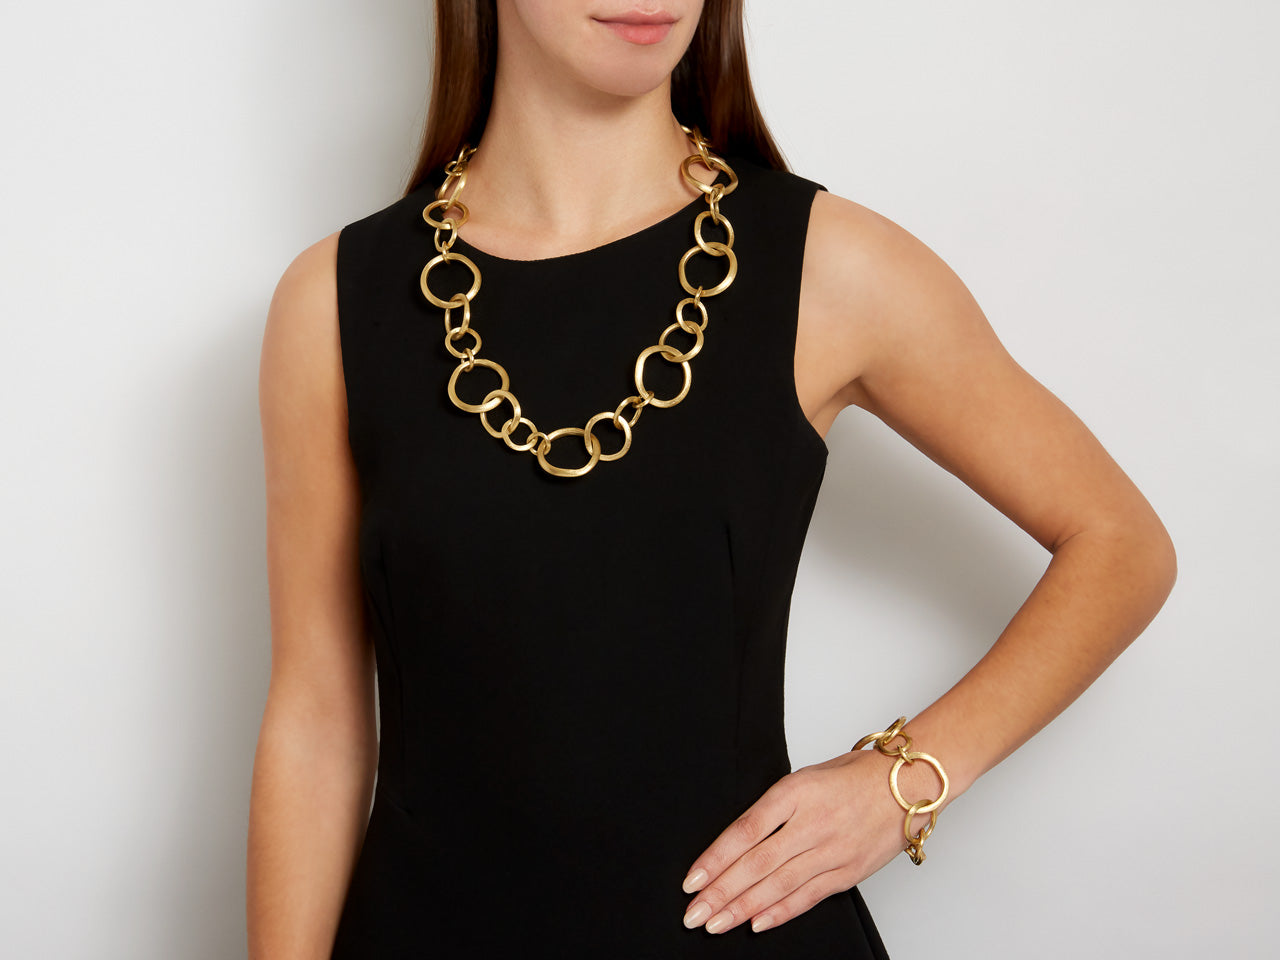 Marco Bicego 'Jaipu' Convertible Necklace in 18K Gold